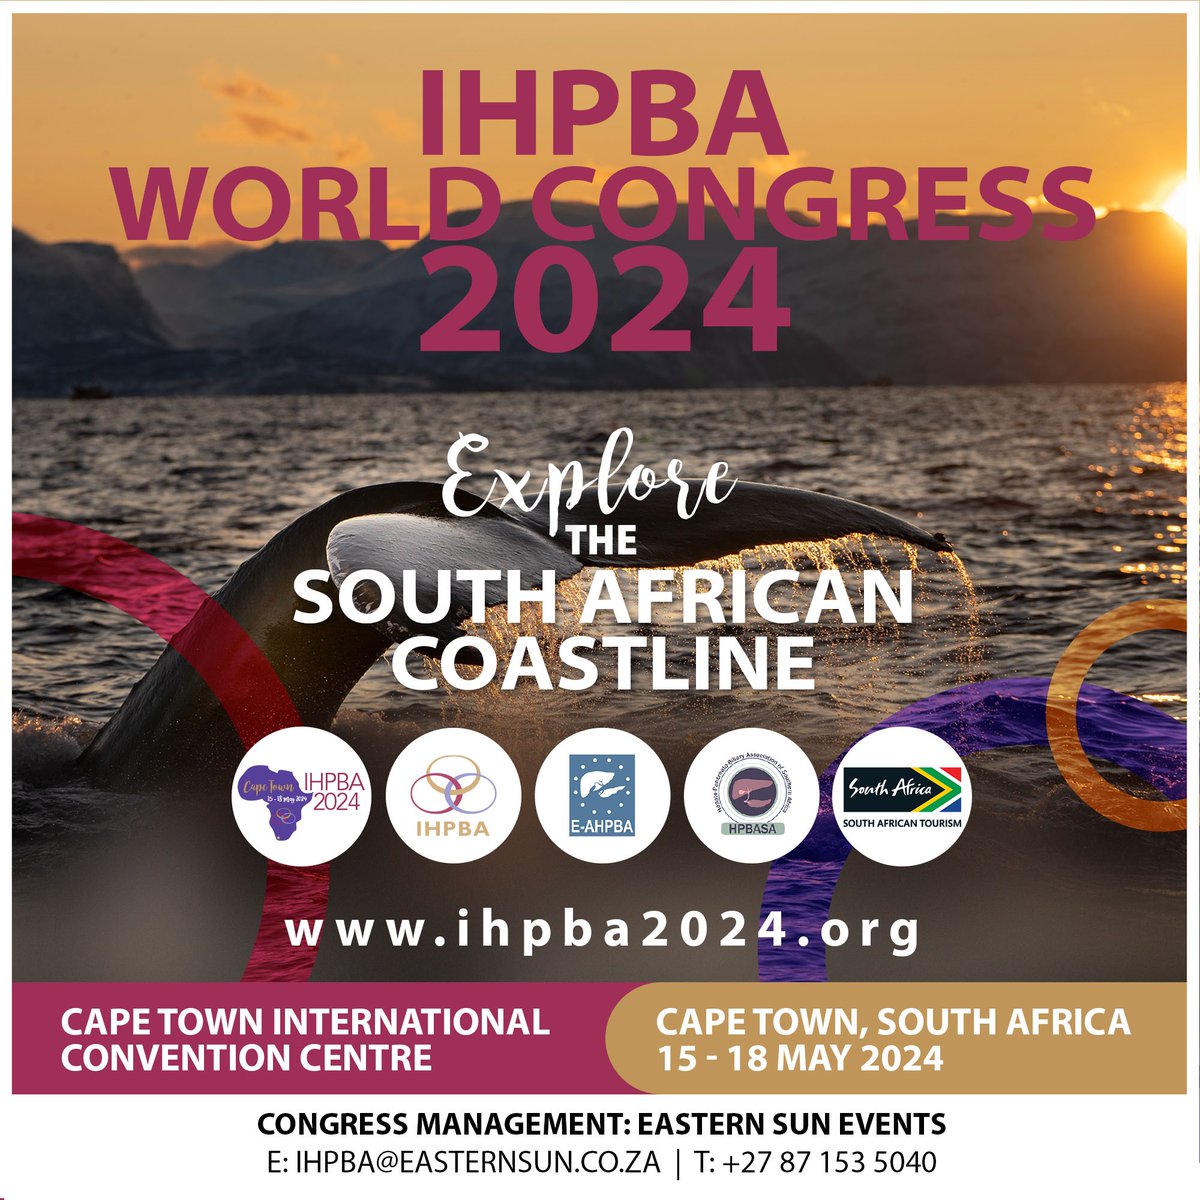 Extend your stay at The IHPBA 2024 Congress and explore Cape Town’s untamed coastline, teeming with abundant marine life, including many species of whales. This is your opportunity to see these gentle giants up-close. @AHPBA @EAHPBA #IHPBA24